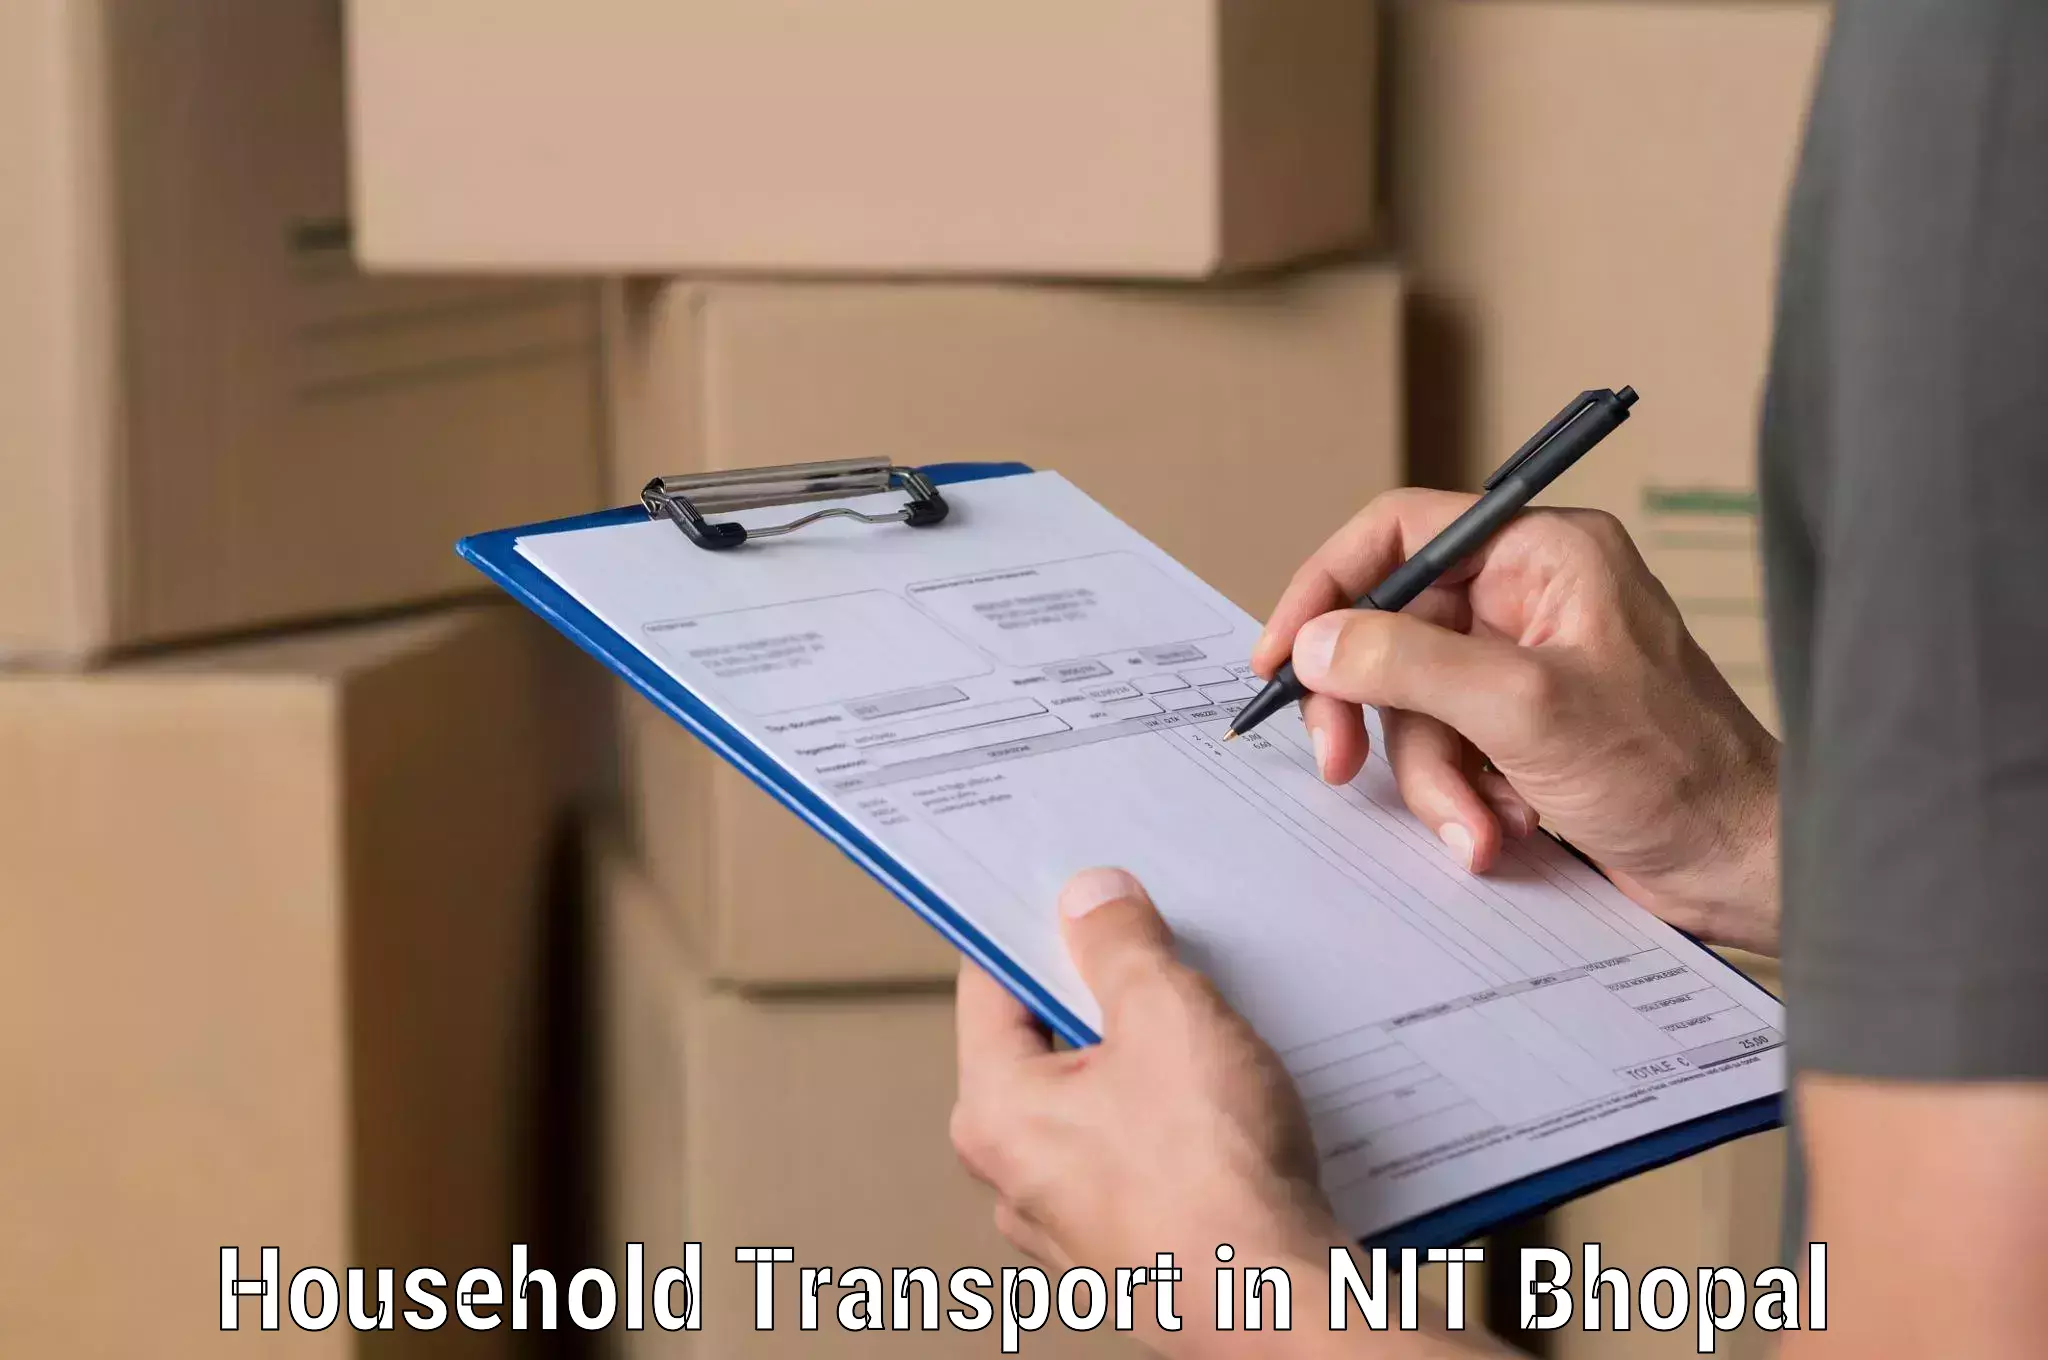 Long-distance household transport in NIT Bhopal